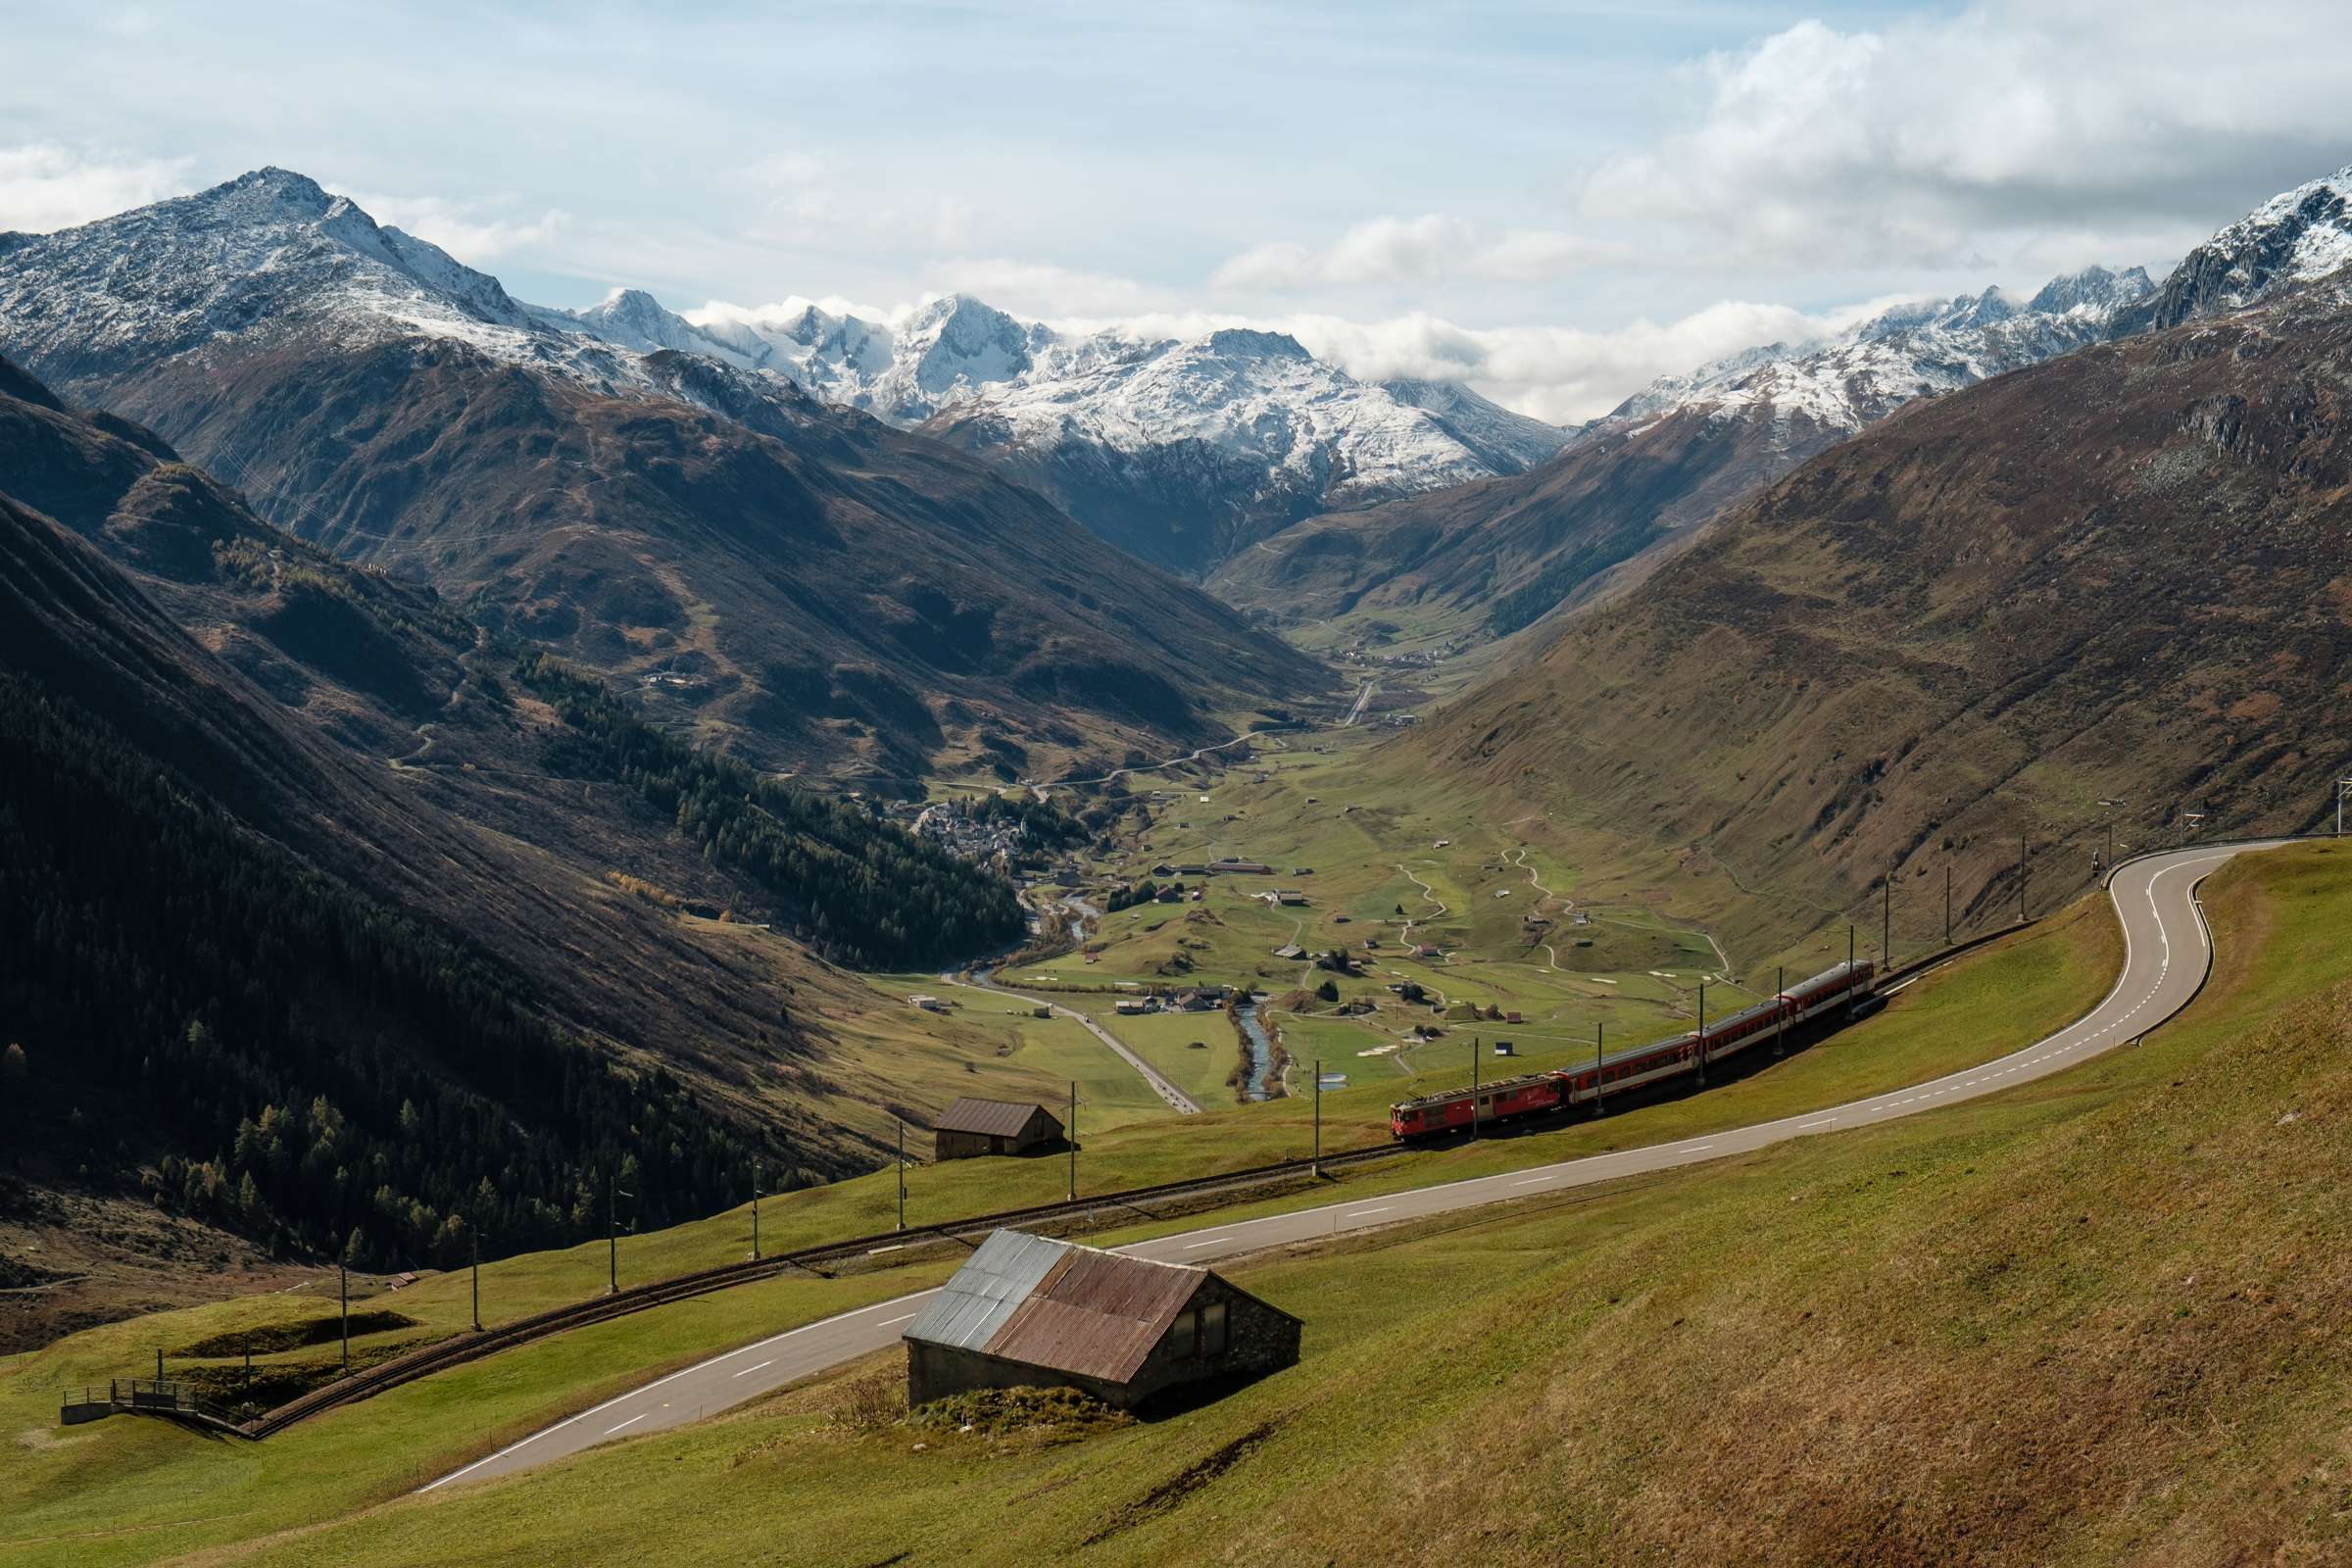 A hitchhiker’s dream: Road tripping through Switzerland